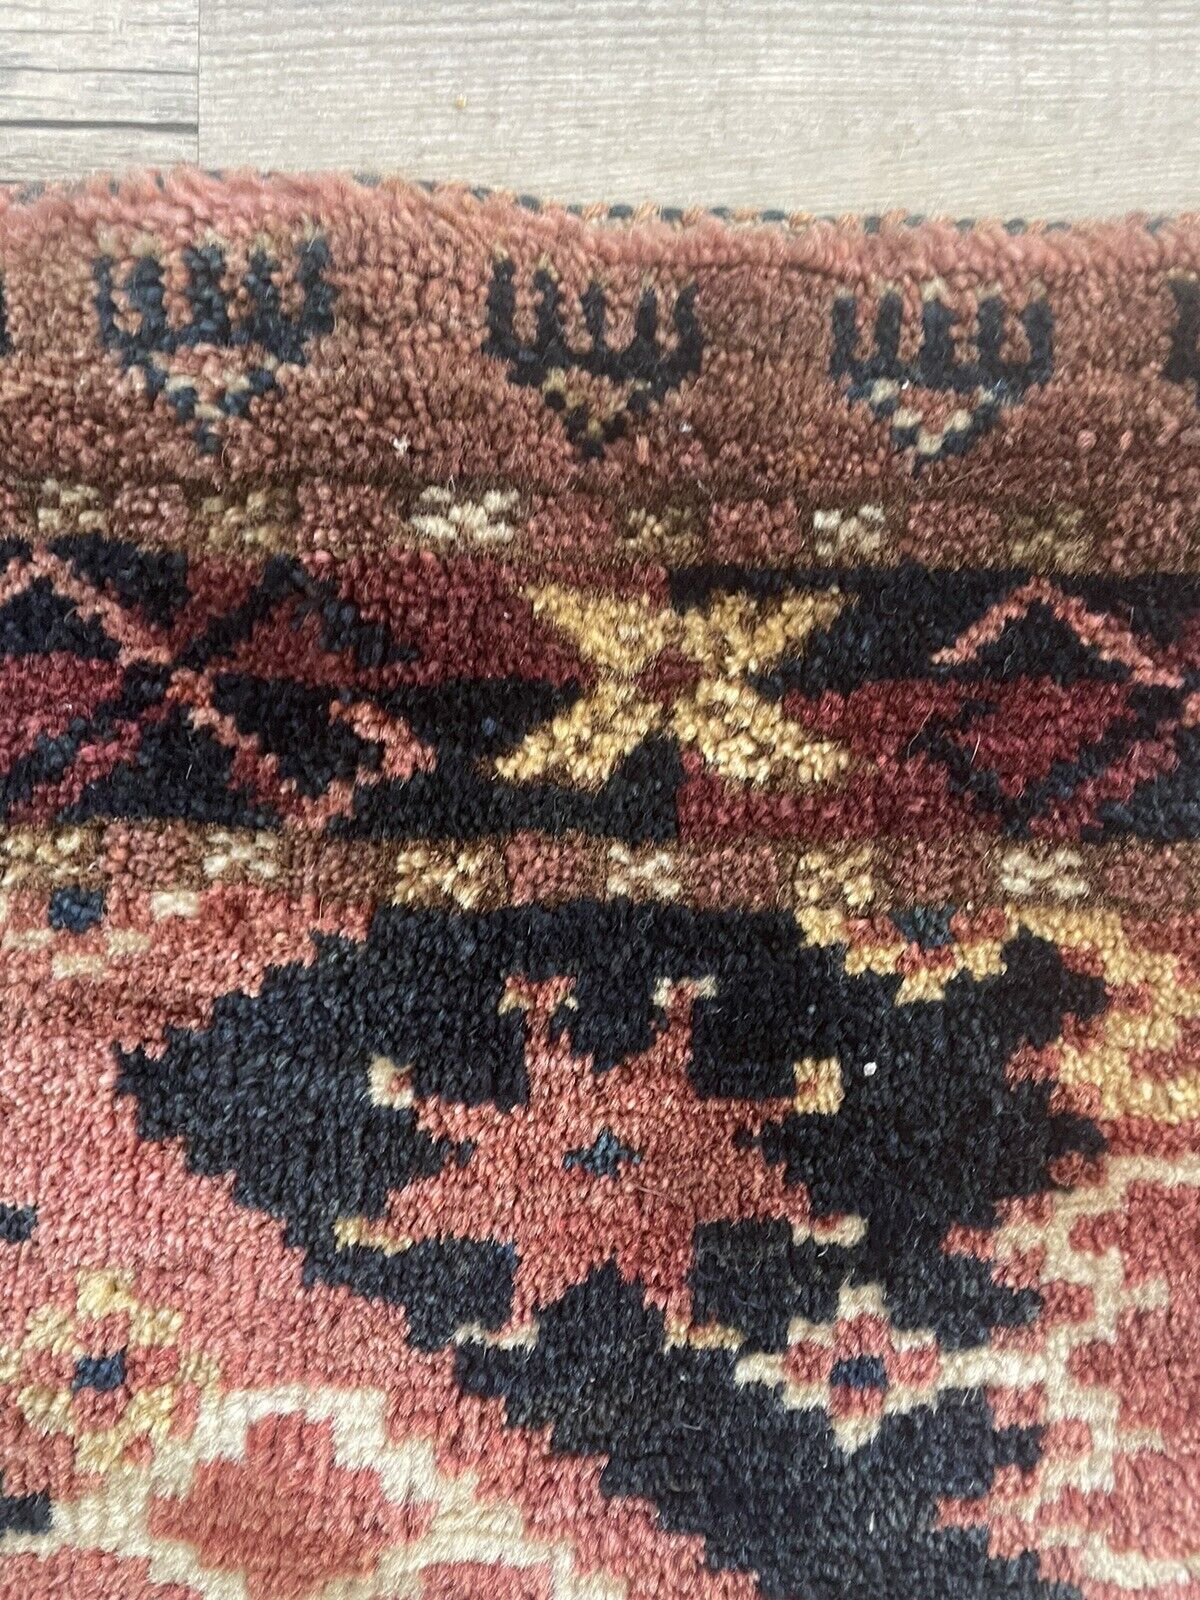 Close-up of intricate designs on Handmade Antique Afghan Beshir Collectible Chuval Rug - Detailed view showcasing the intricate designs and patterns woven into the rug's surface, reflecting the rich cultural heritage of Afghanistan.